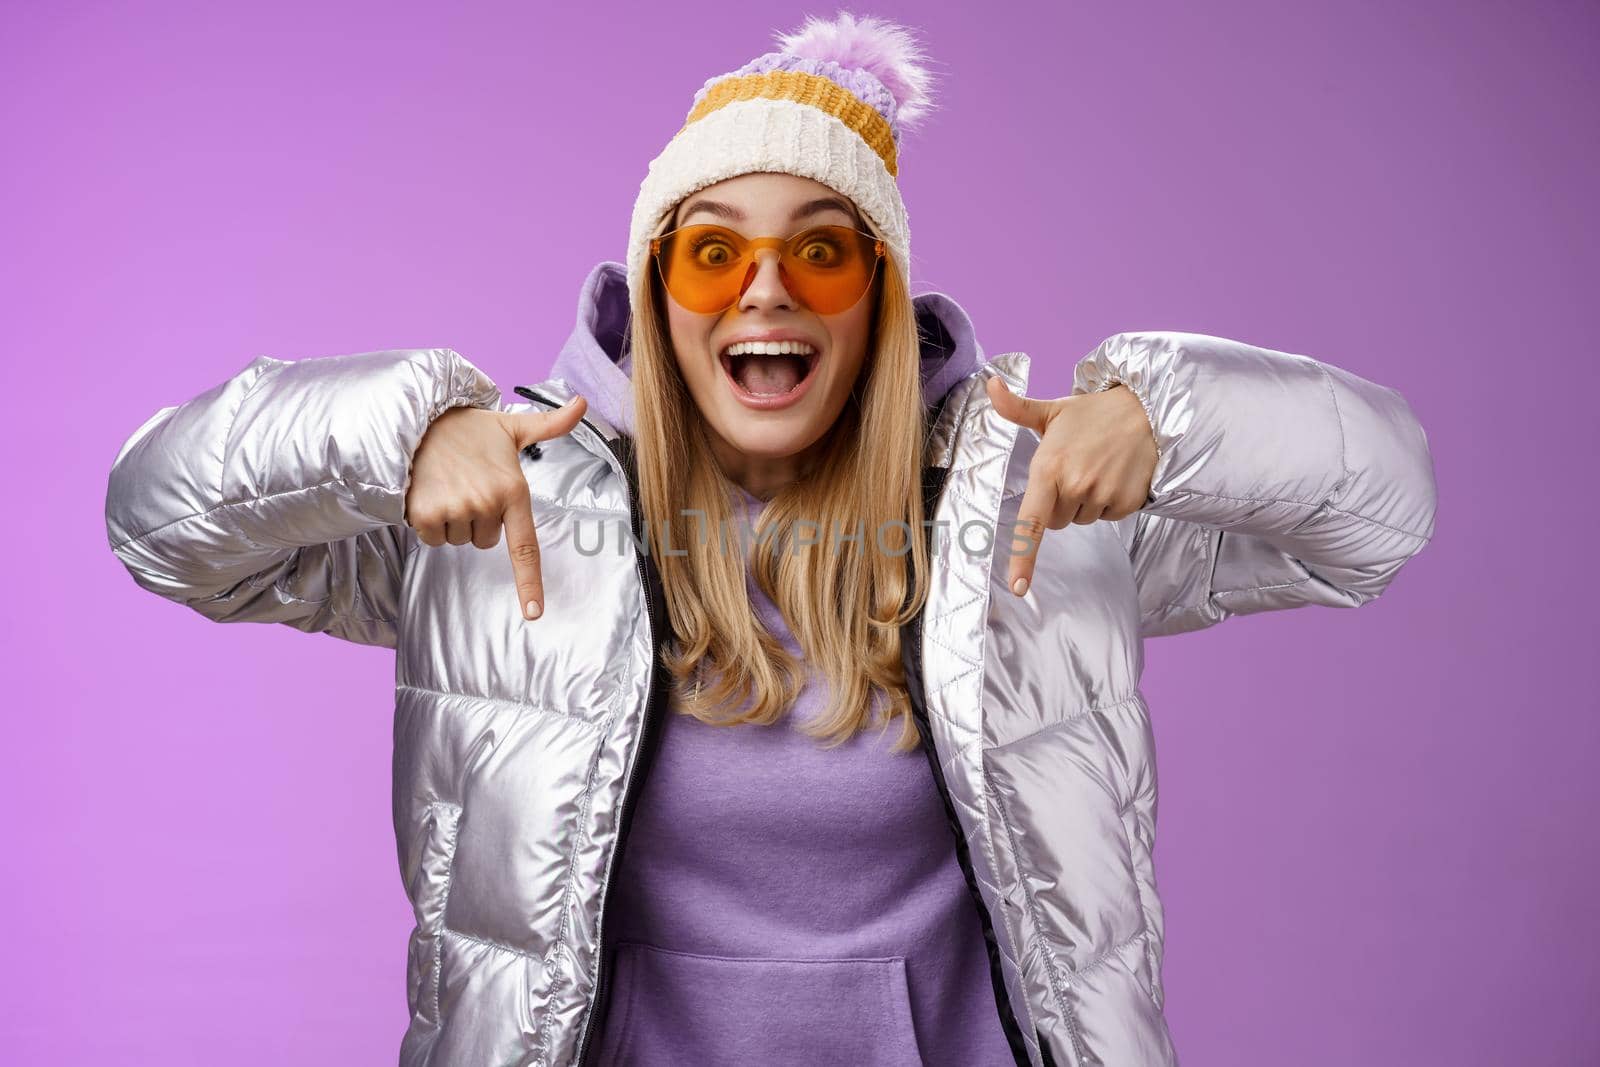 Excited impressed good-looking blond girl drop jaw amused overwhelmed pointing down index fingers checking out awesome promotion standing surprised thrilled wearing silver winter jacket hat.